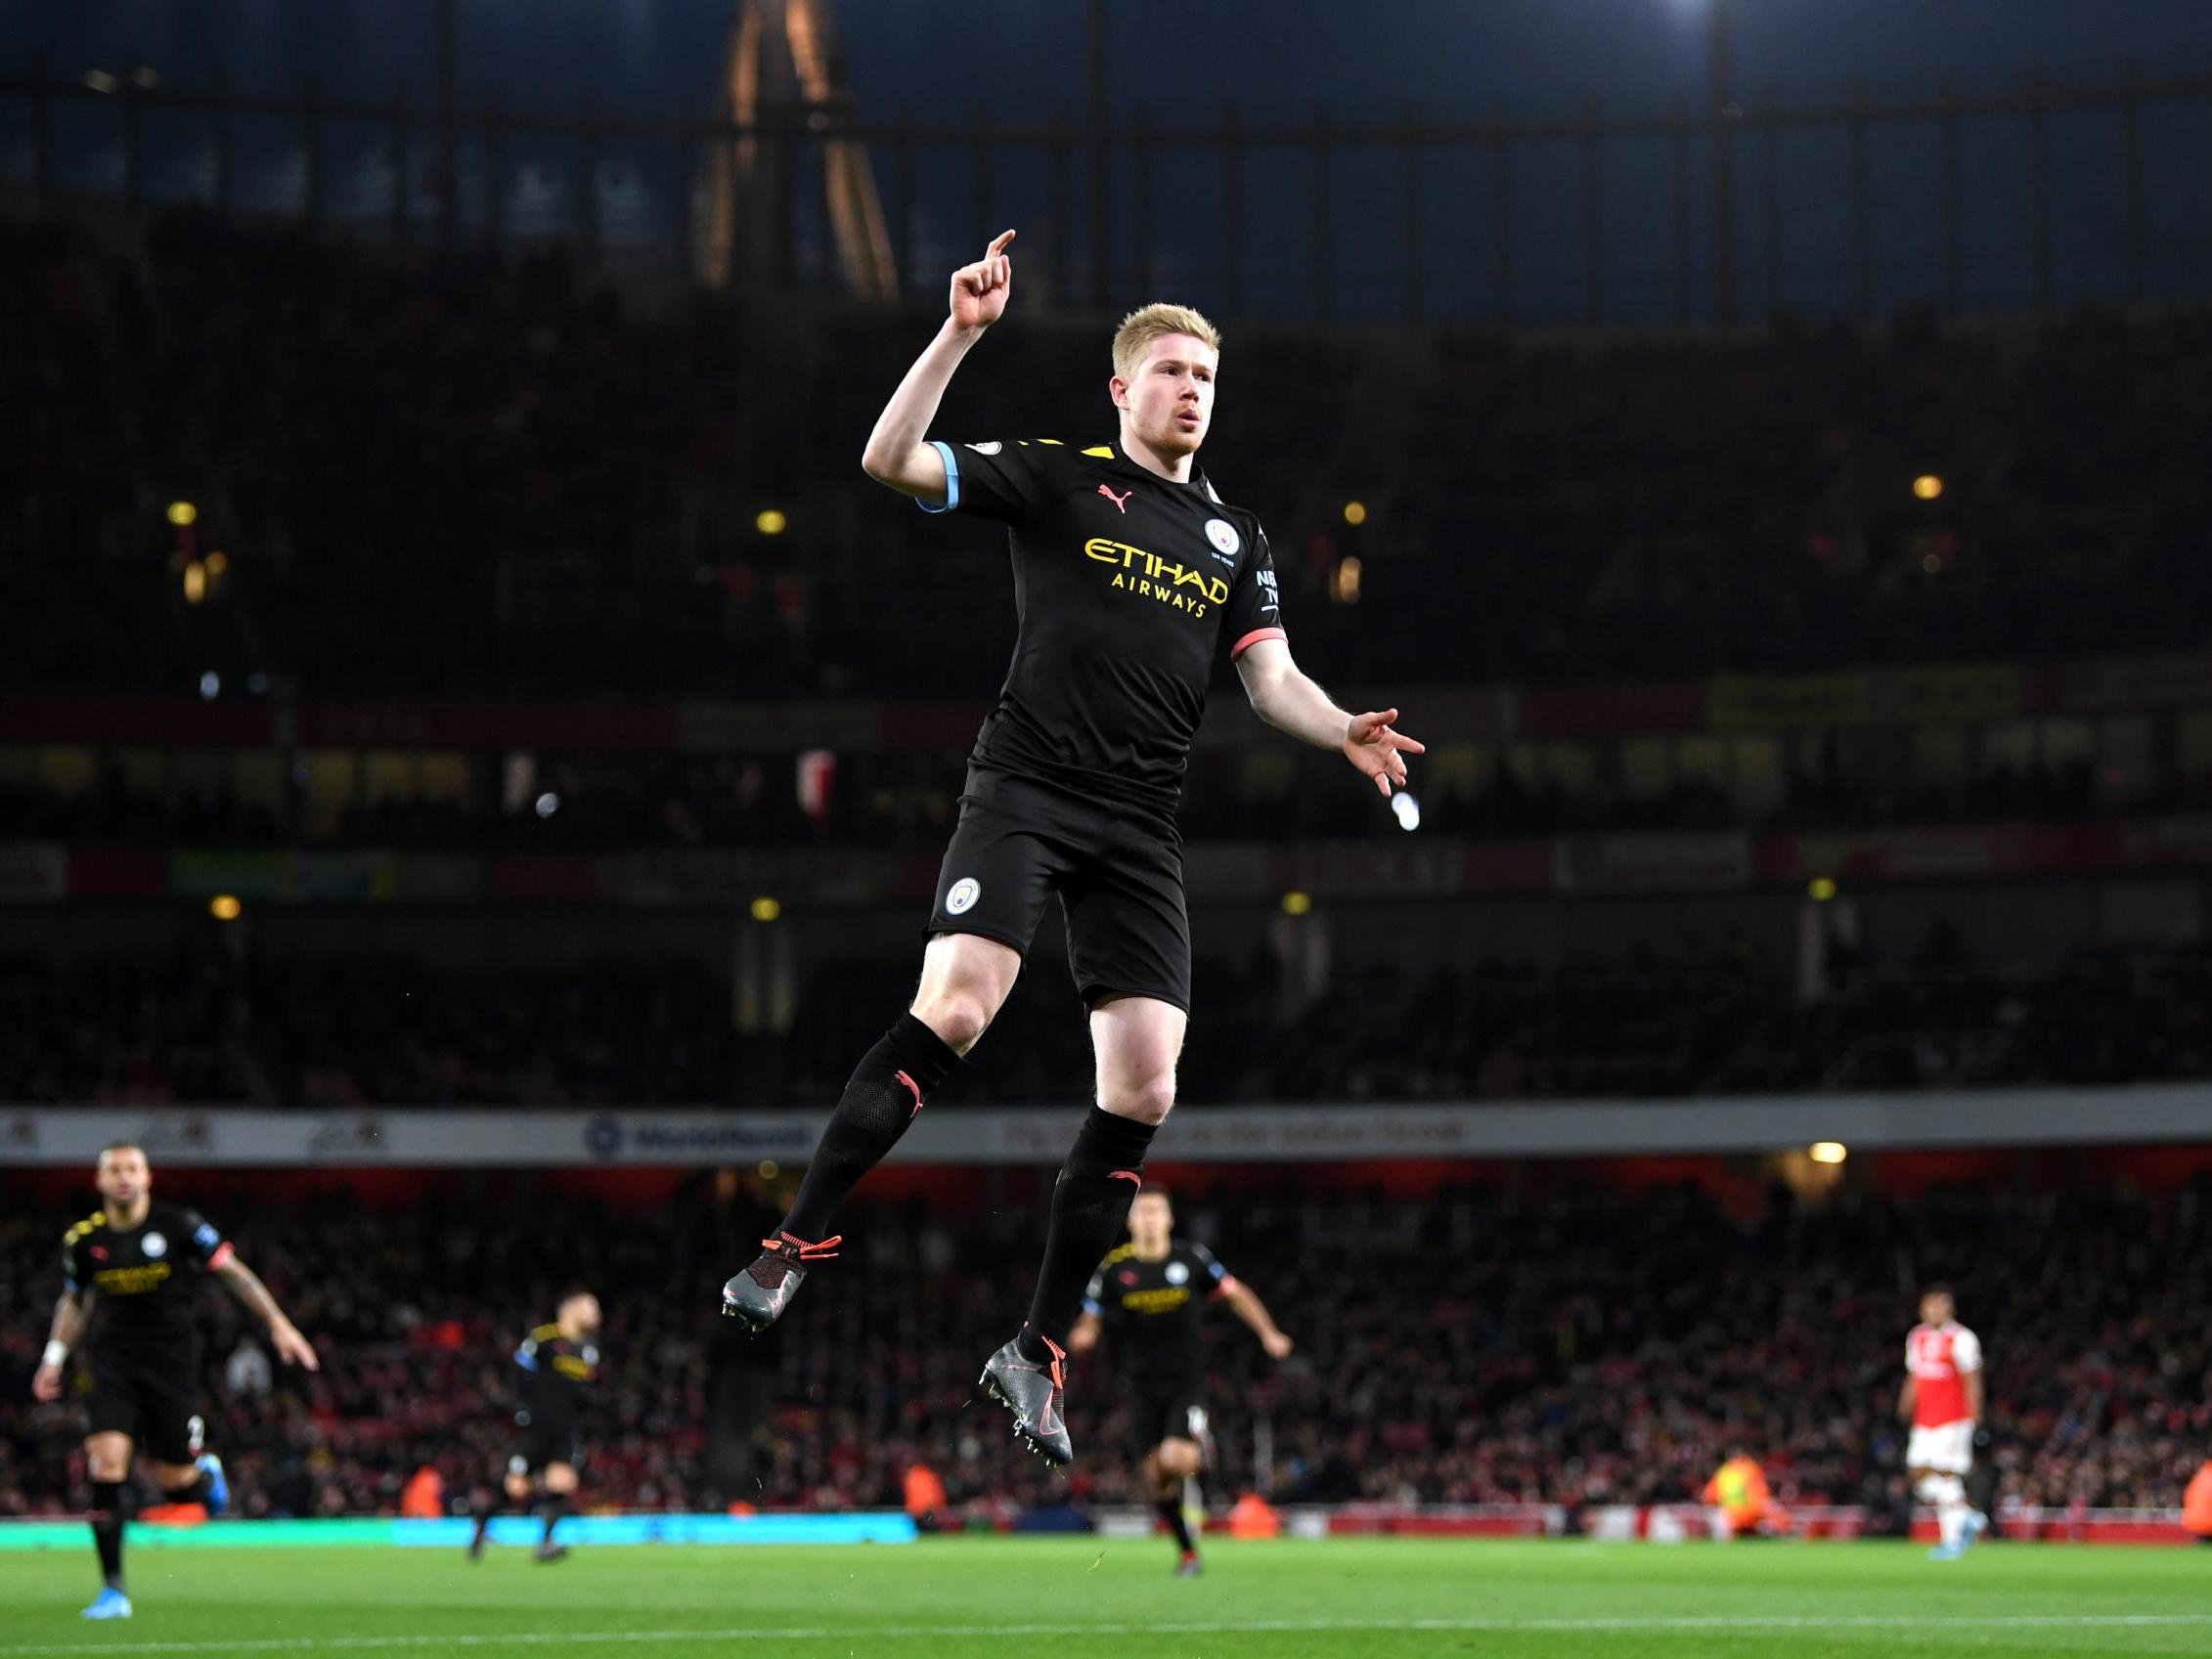 Kevin De Bruyne celebrates after scoring Manchester City's first goal of the evening